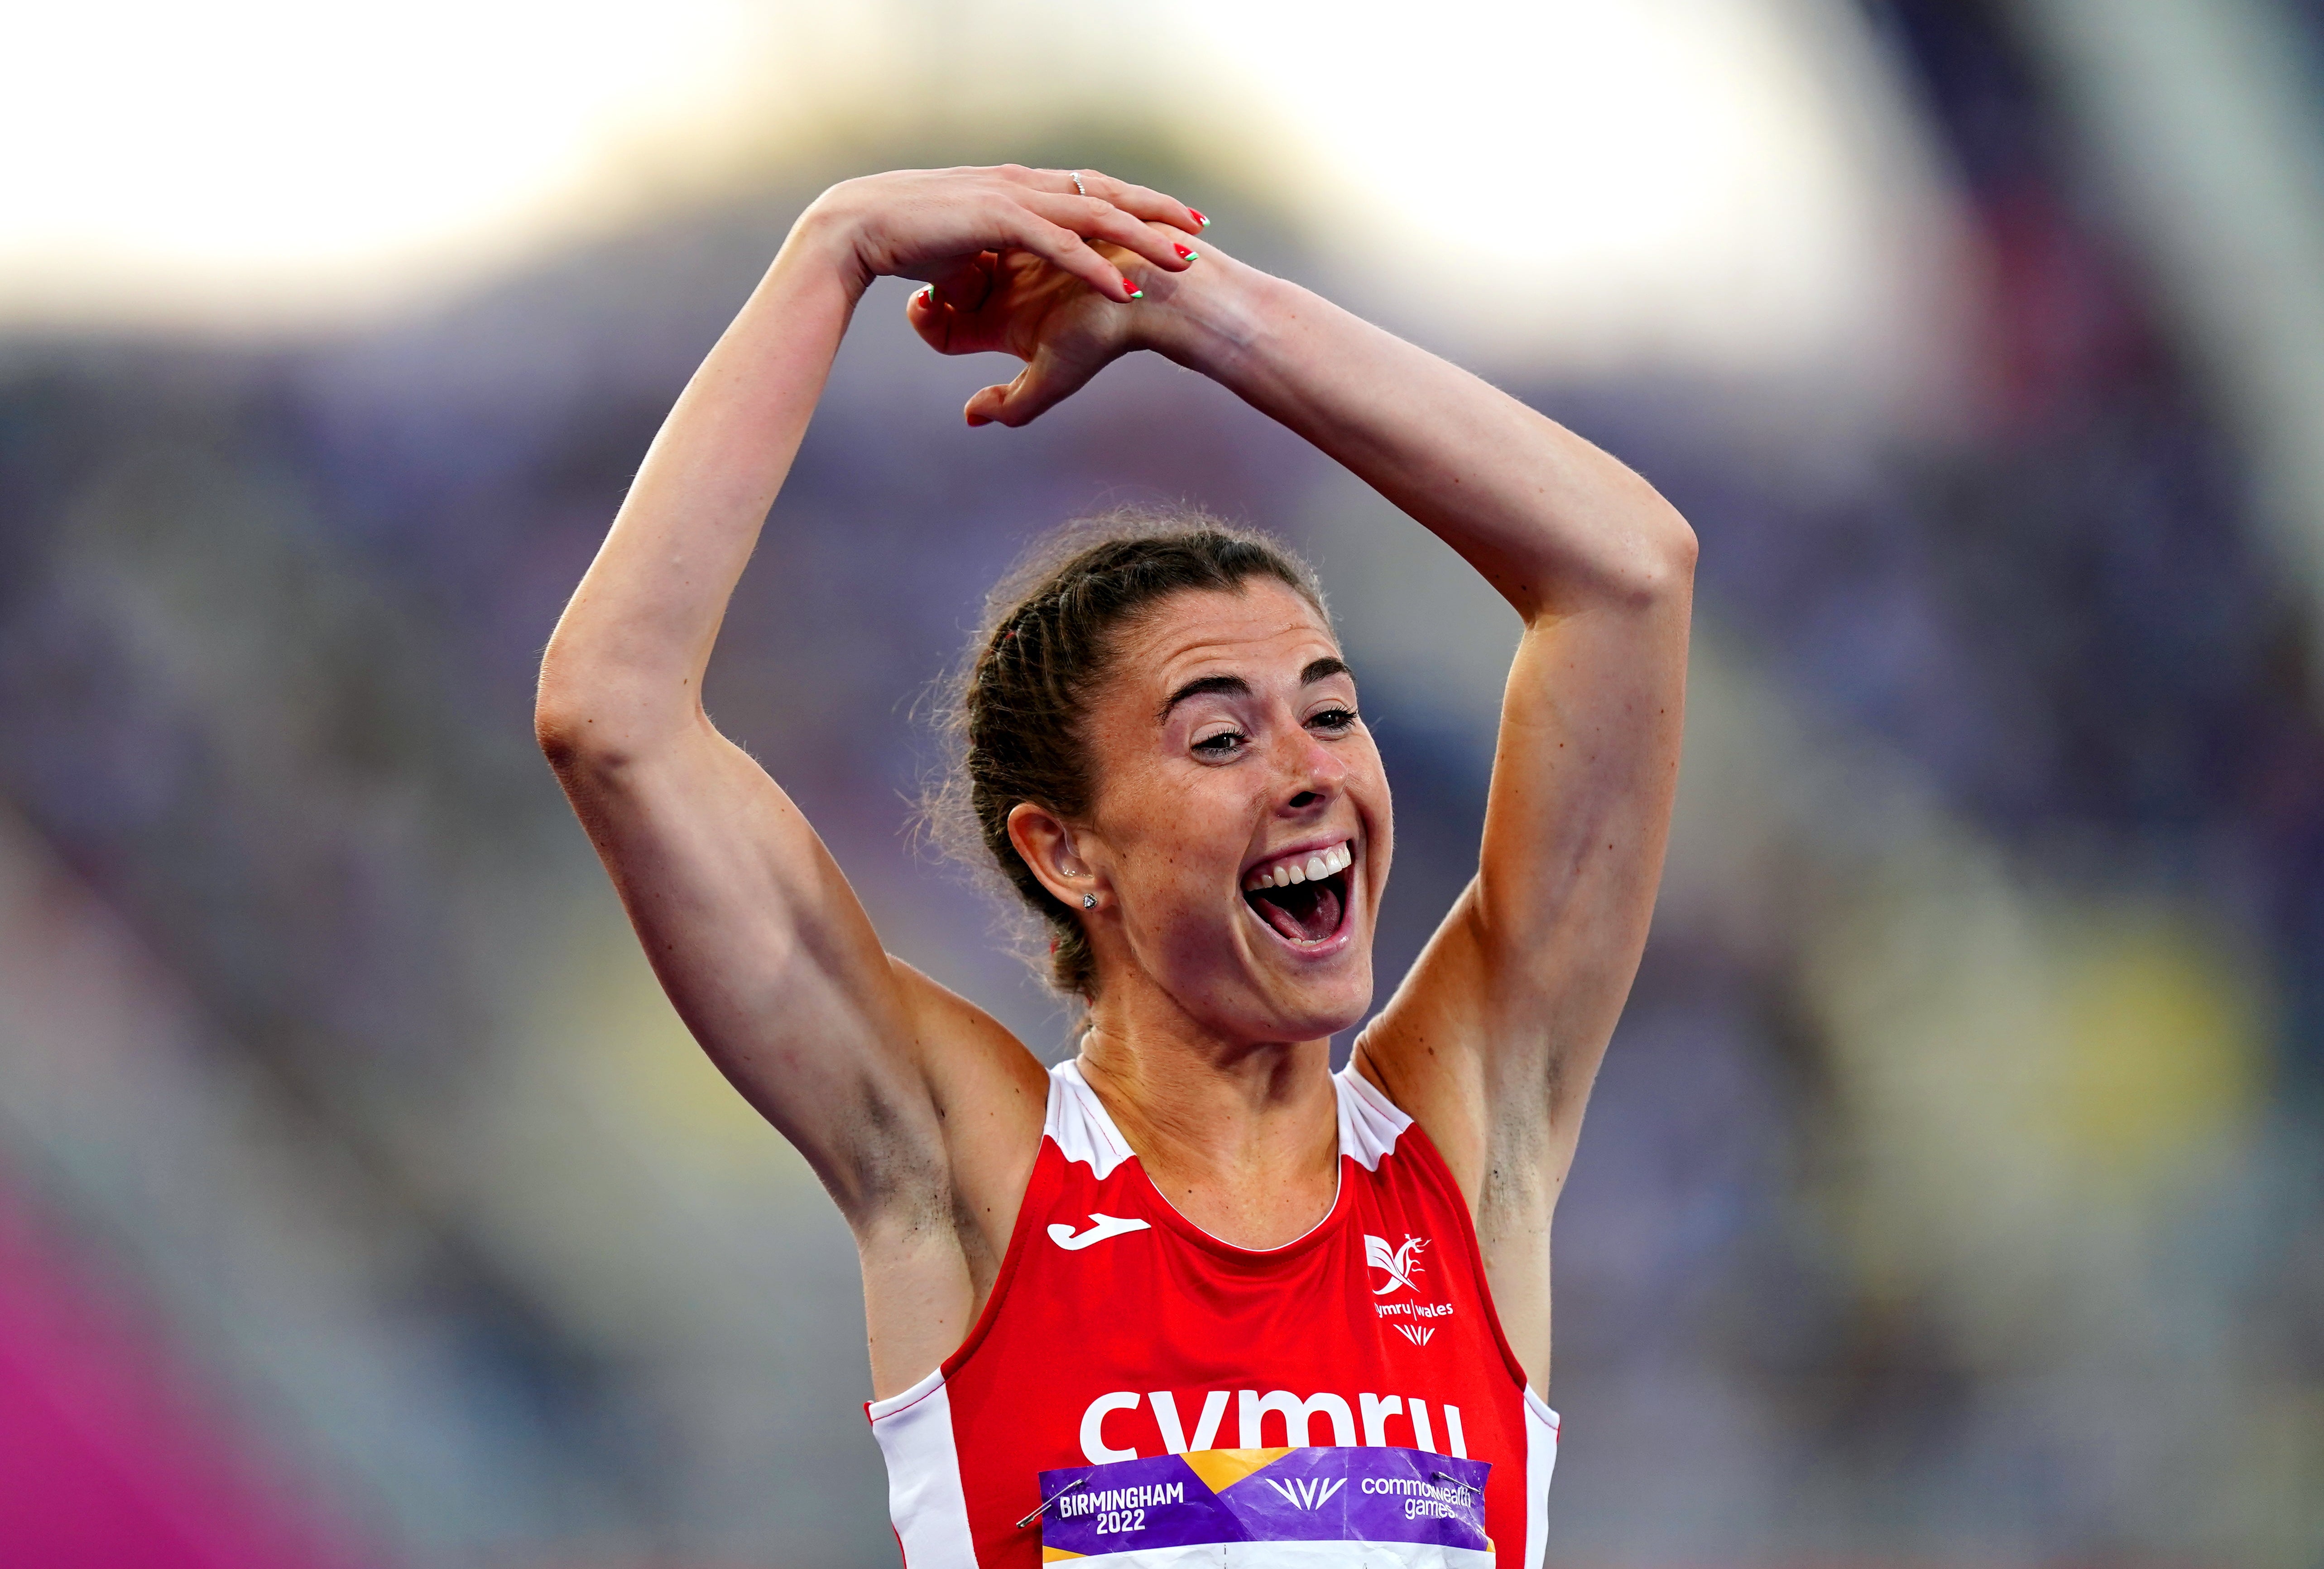 Wales’ Olivia Breen shows her delight after winning Commonwealth Games gold on the track (Mike Egerton/PA)